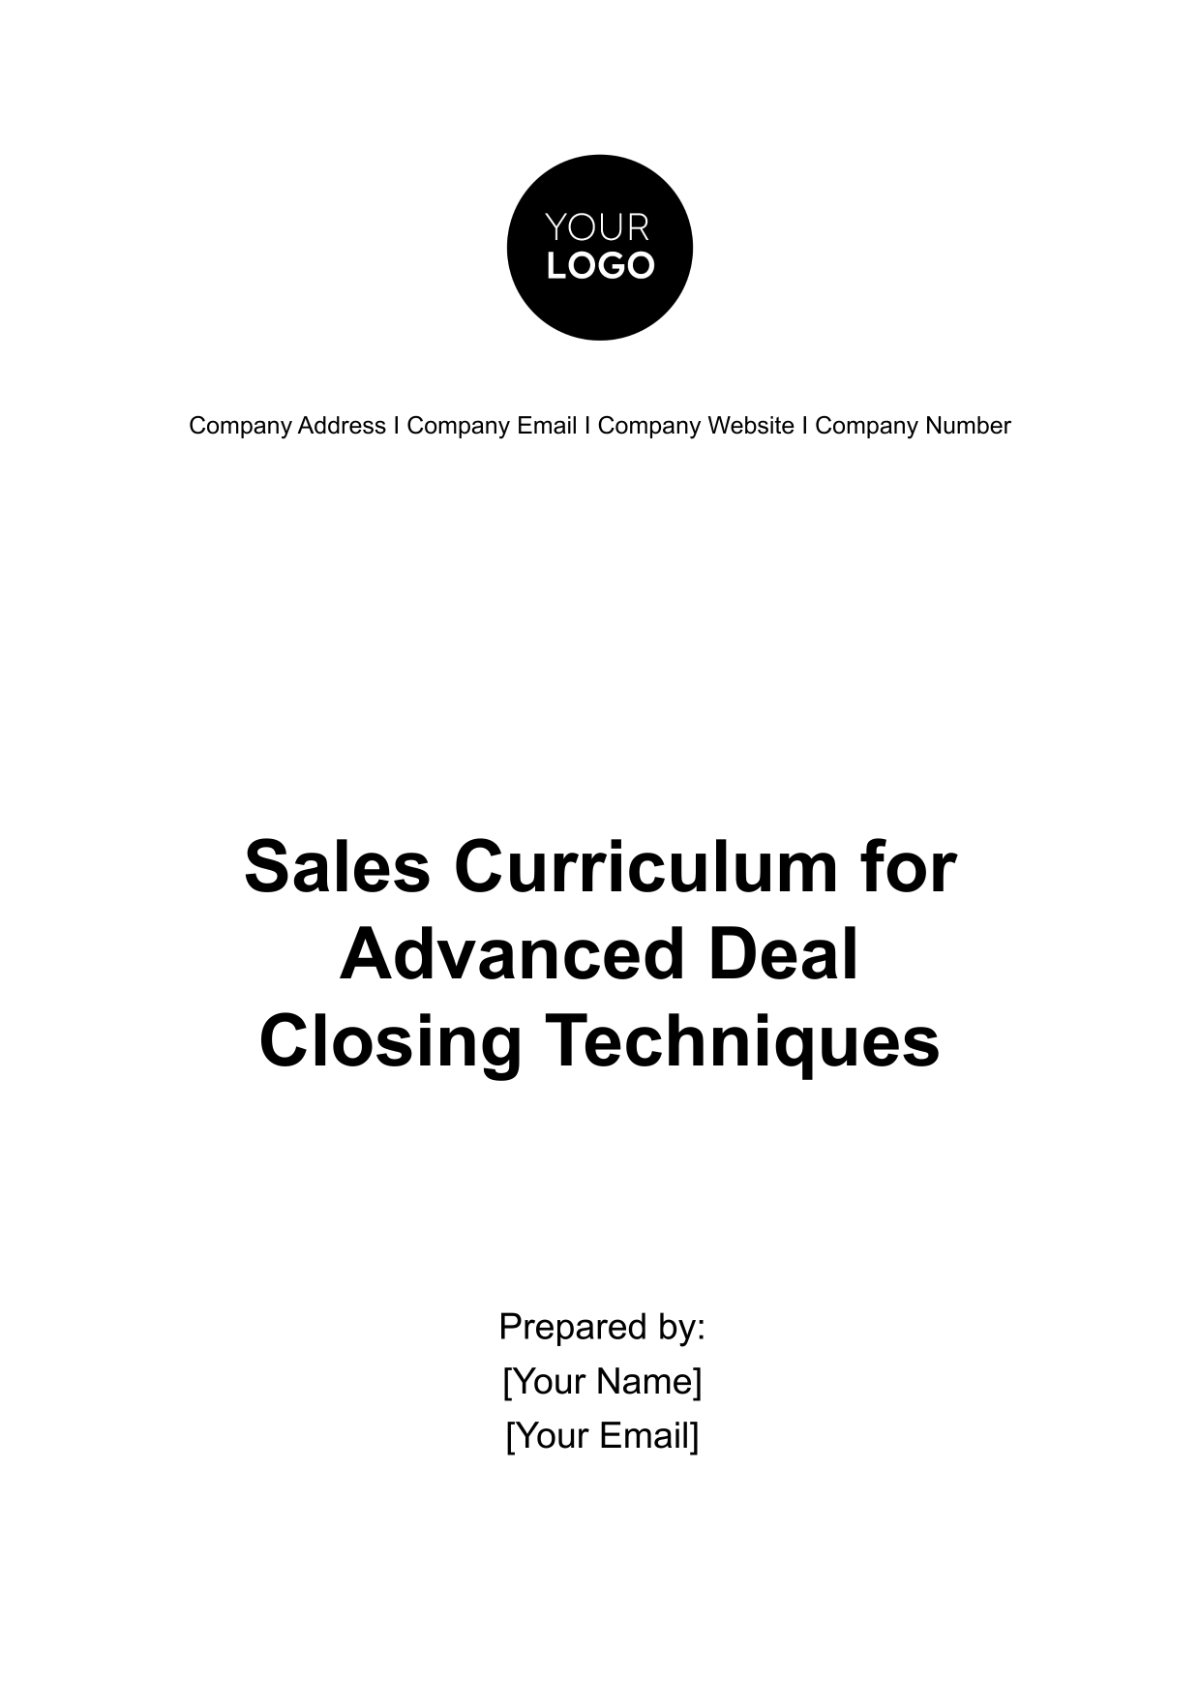 Sales Curriculum for Advanced Deal Closing Techniques Template